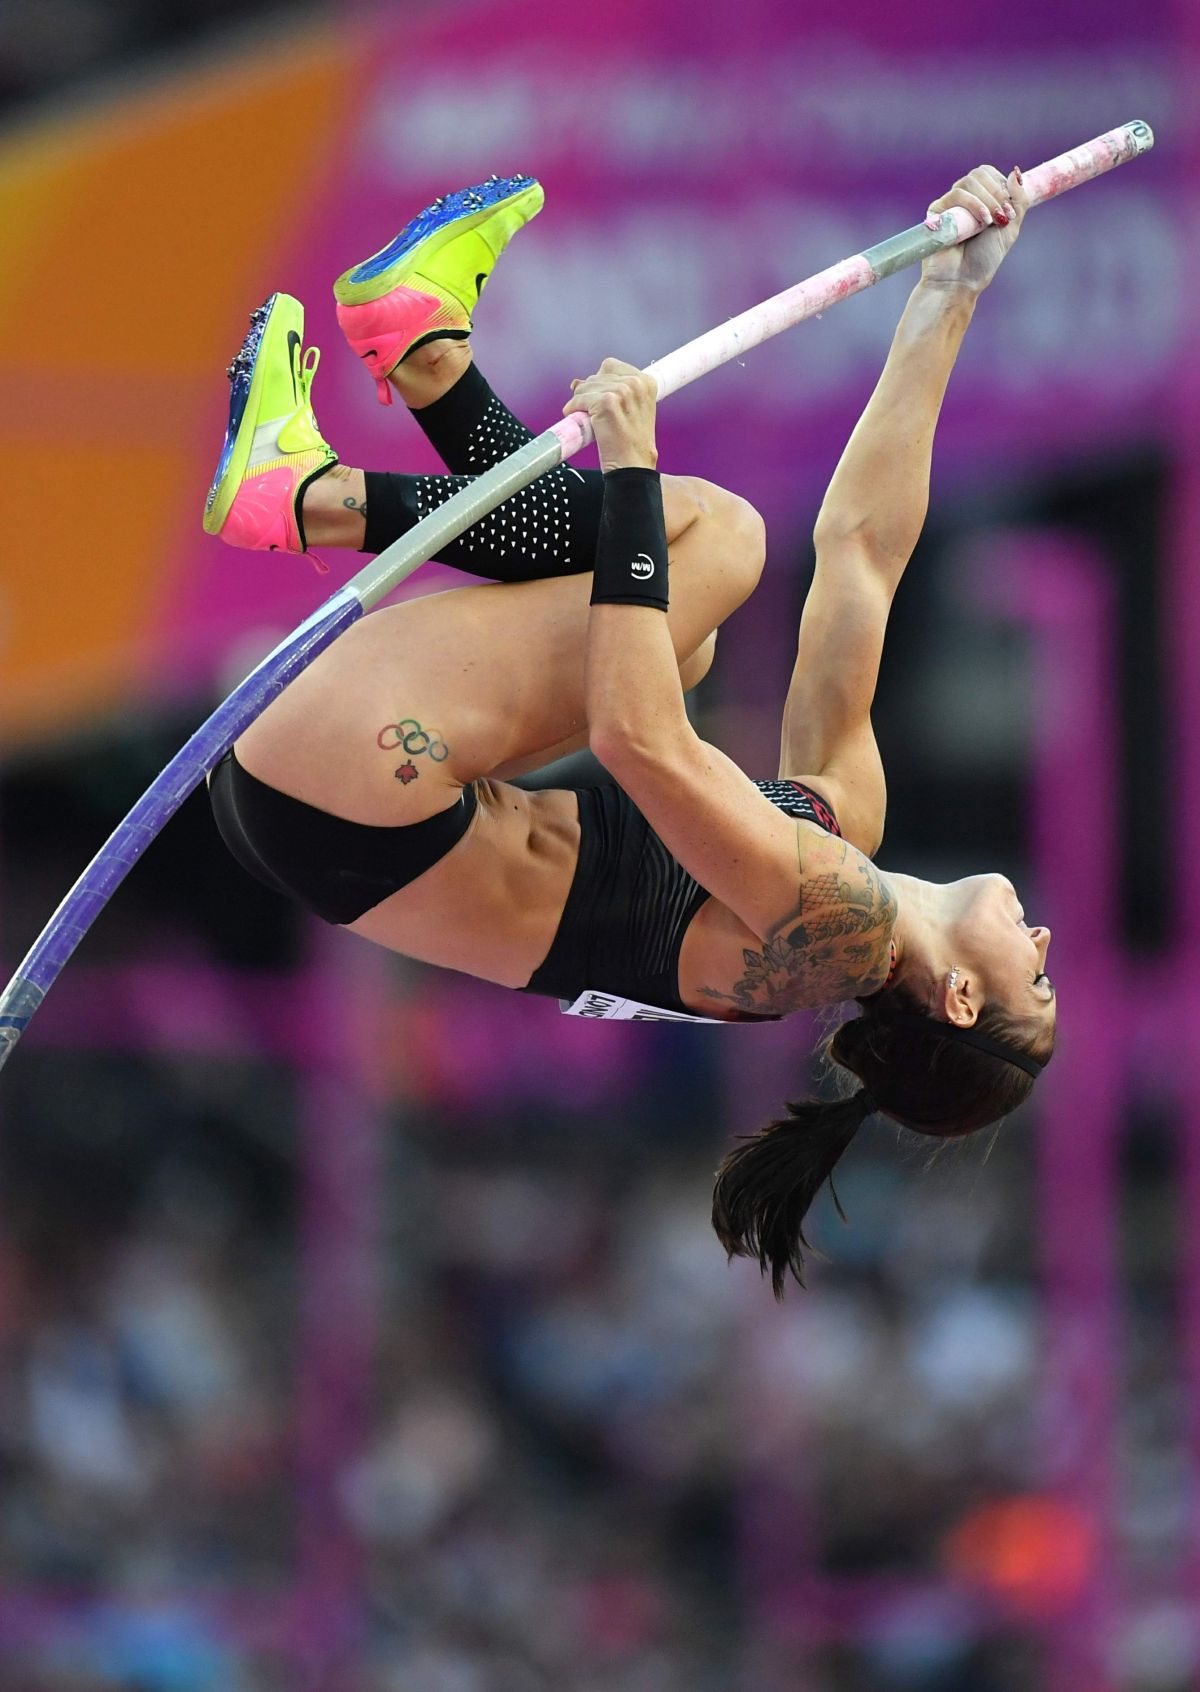 ANICKA NEWELL at Women’s Pole Vault Final at IAAF World Championships in Lo...